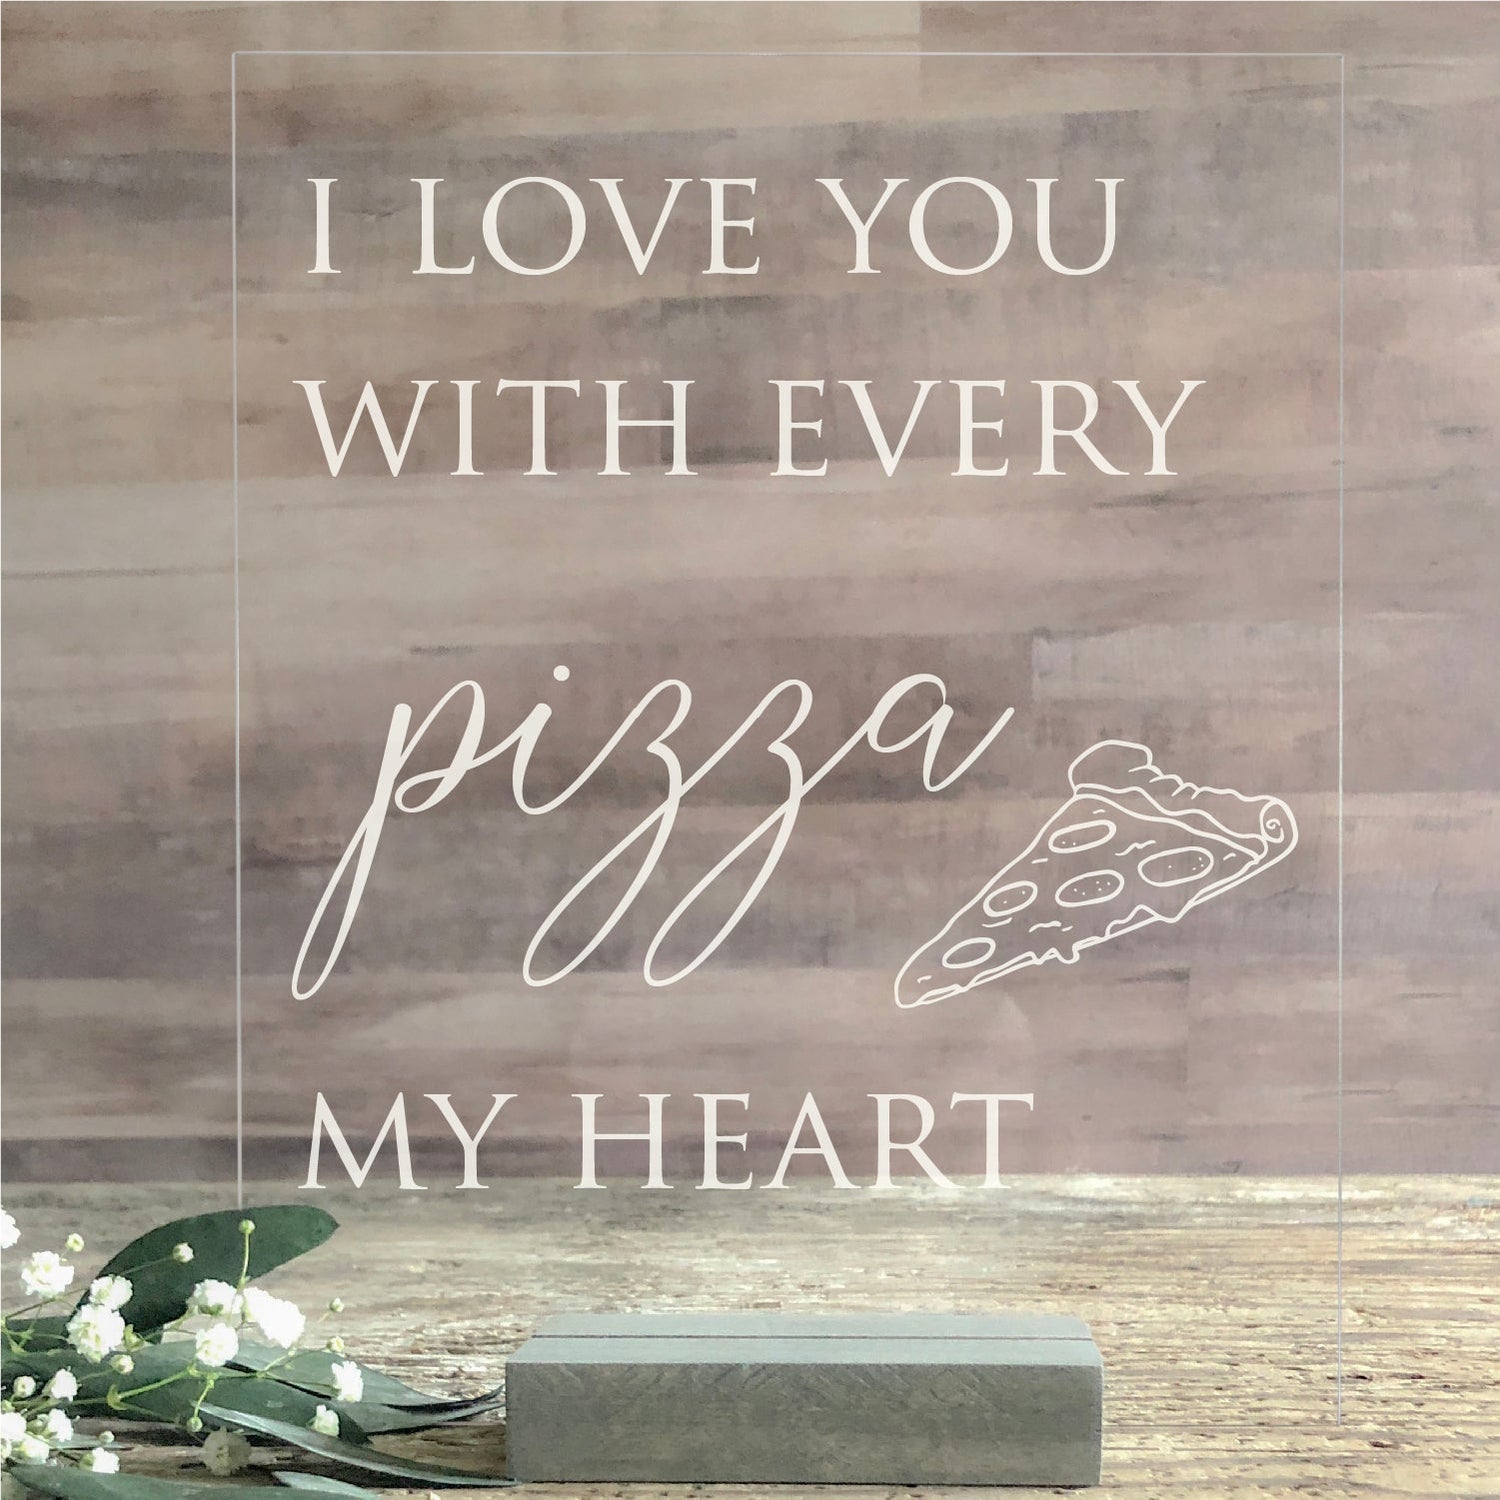 Acrylic Pizza My Heart Wedding Reception Food Table Sign | Lucite Table Sign | Wedding Buffet Table Sign | SCC-209 - SCC Signs